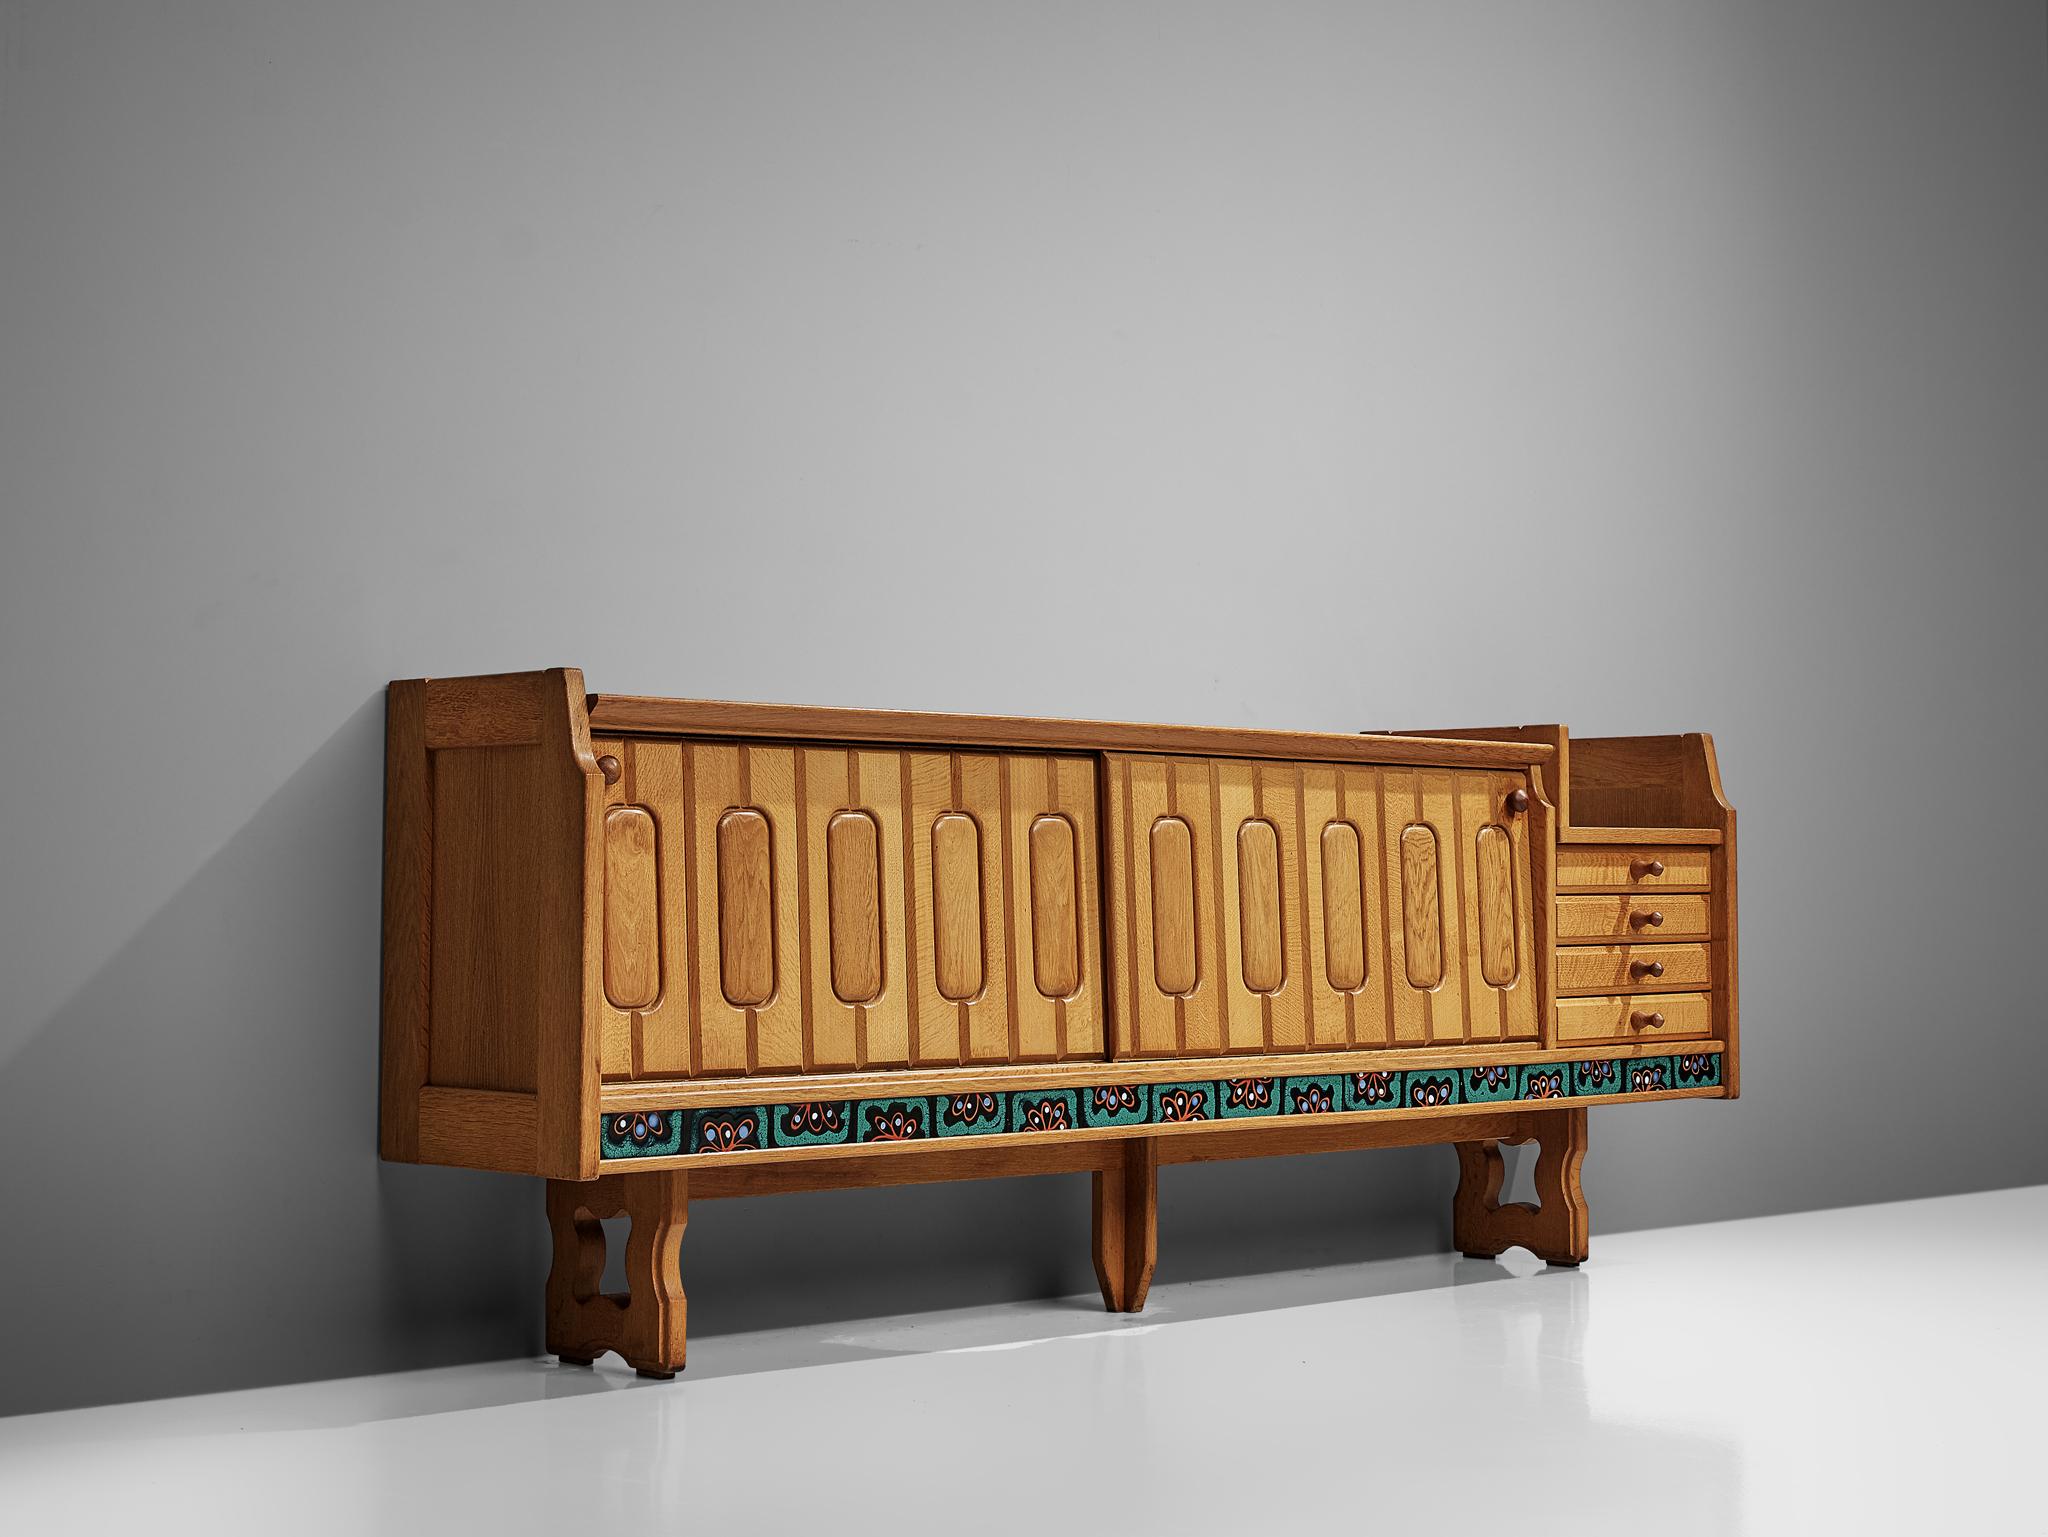 Guillerme et Chambron for Votre Maison, sideboard model Simon, oak and ceramic, France, 1960s.

Credenza in oak by French designers Guillerme & Chambron. This sideboard is equipped with two sliding-doors and a set of drawers. The front of the